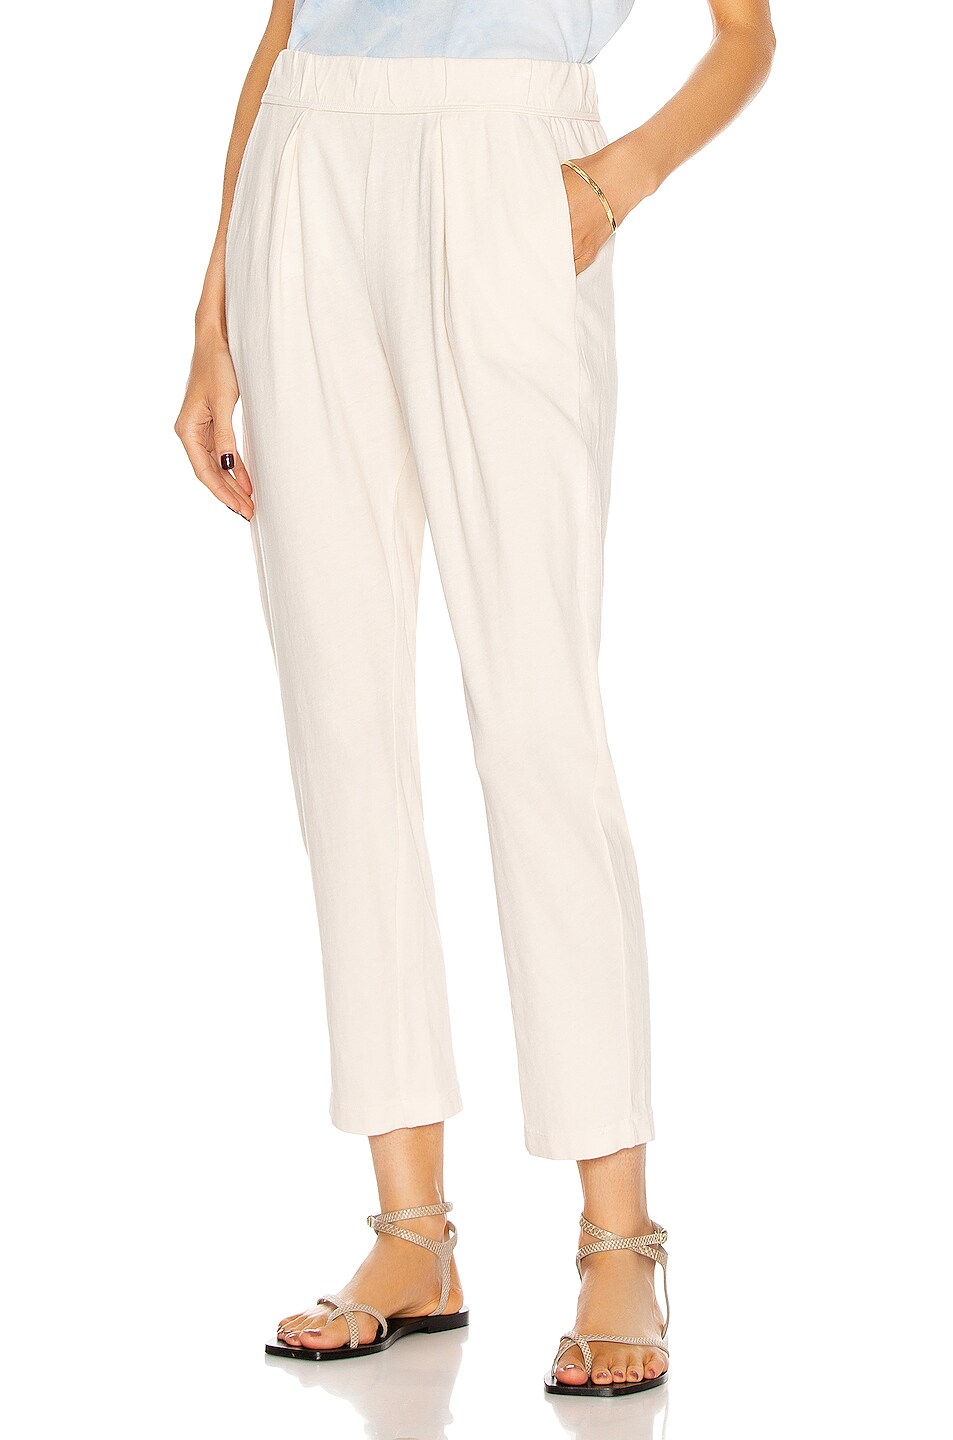 Image 1 of Raquel Allegra Easy Pant in Washed White